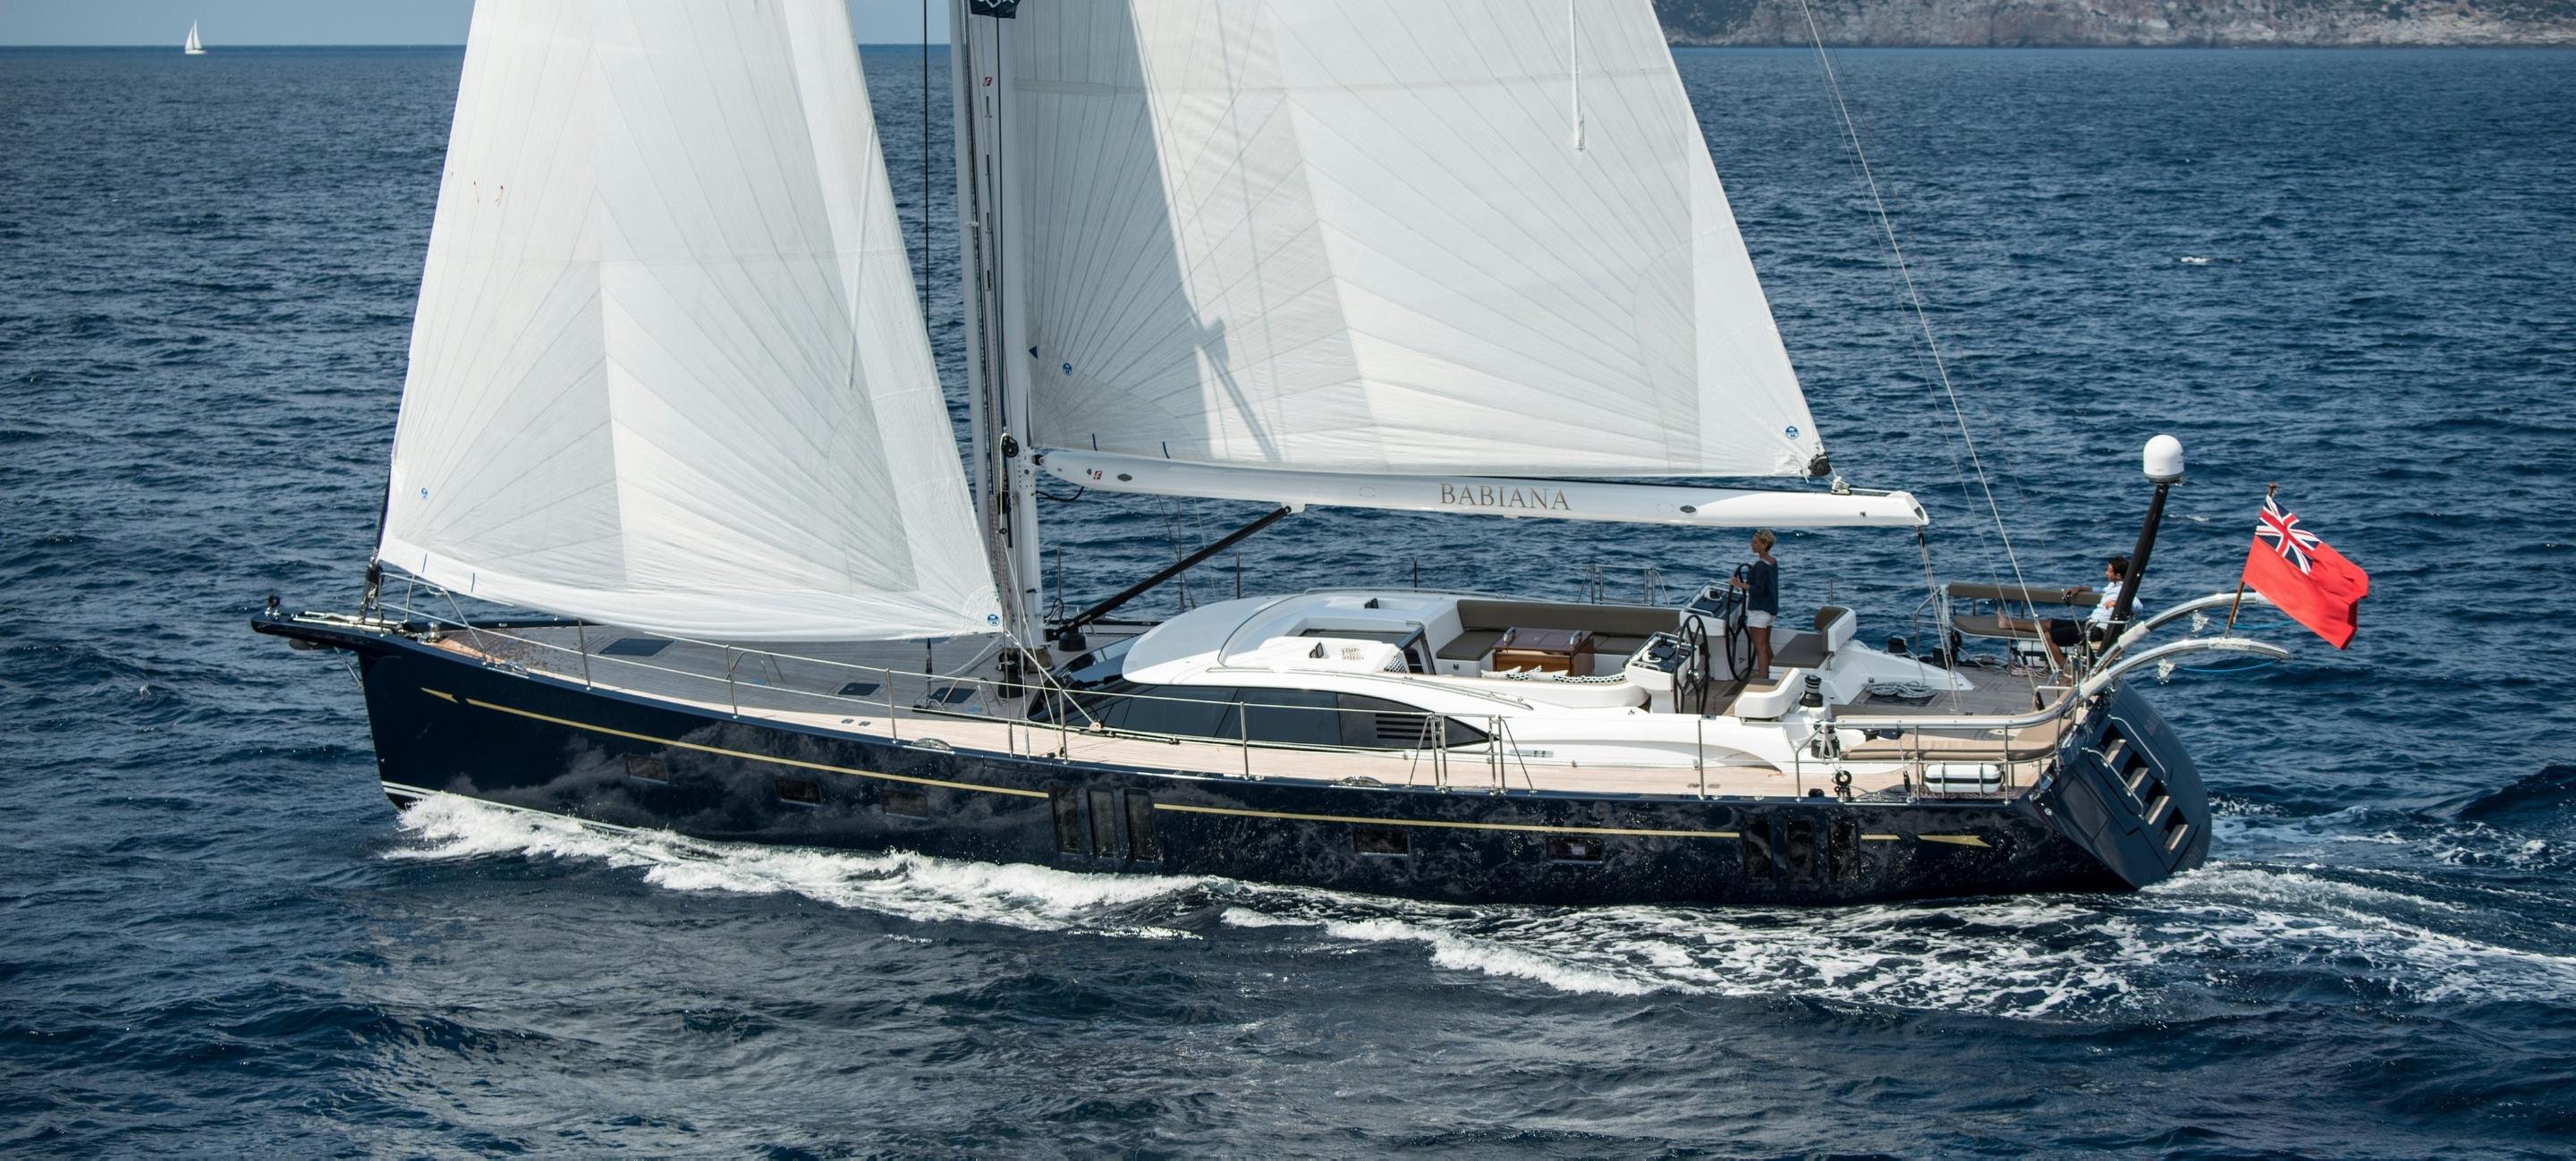 Oyster 675 70 Foot Ocean Sailboat For Sale Oyster Yachts